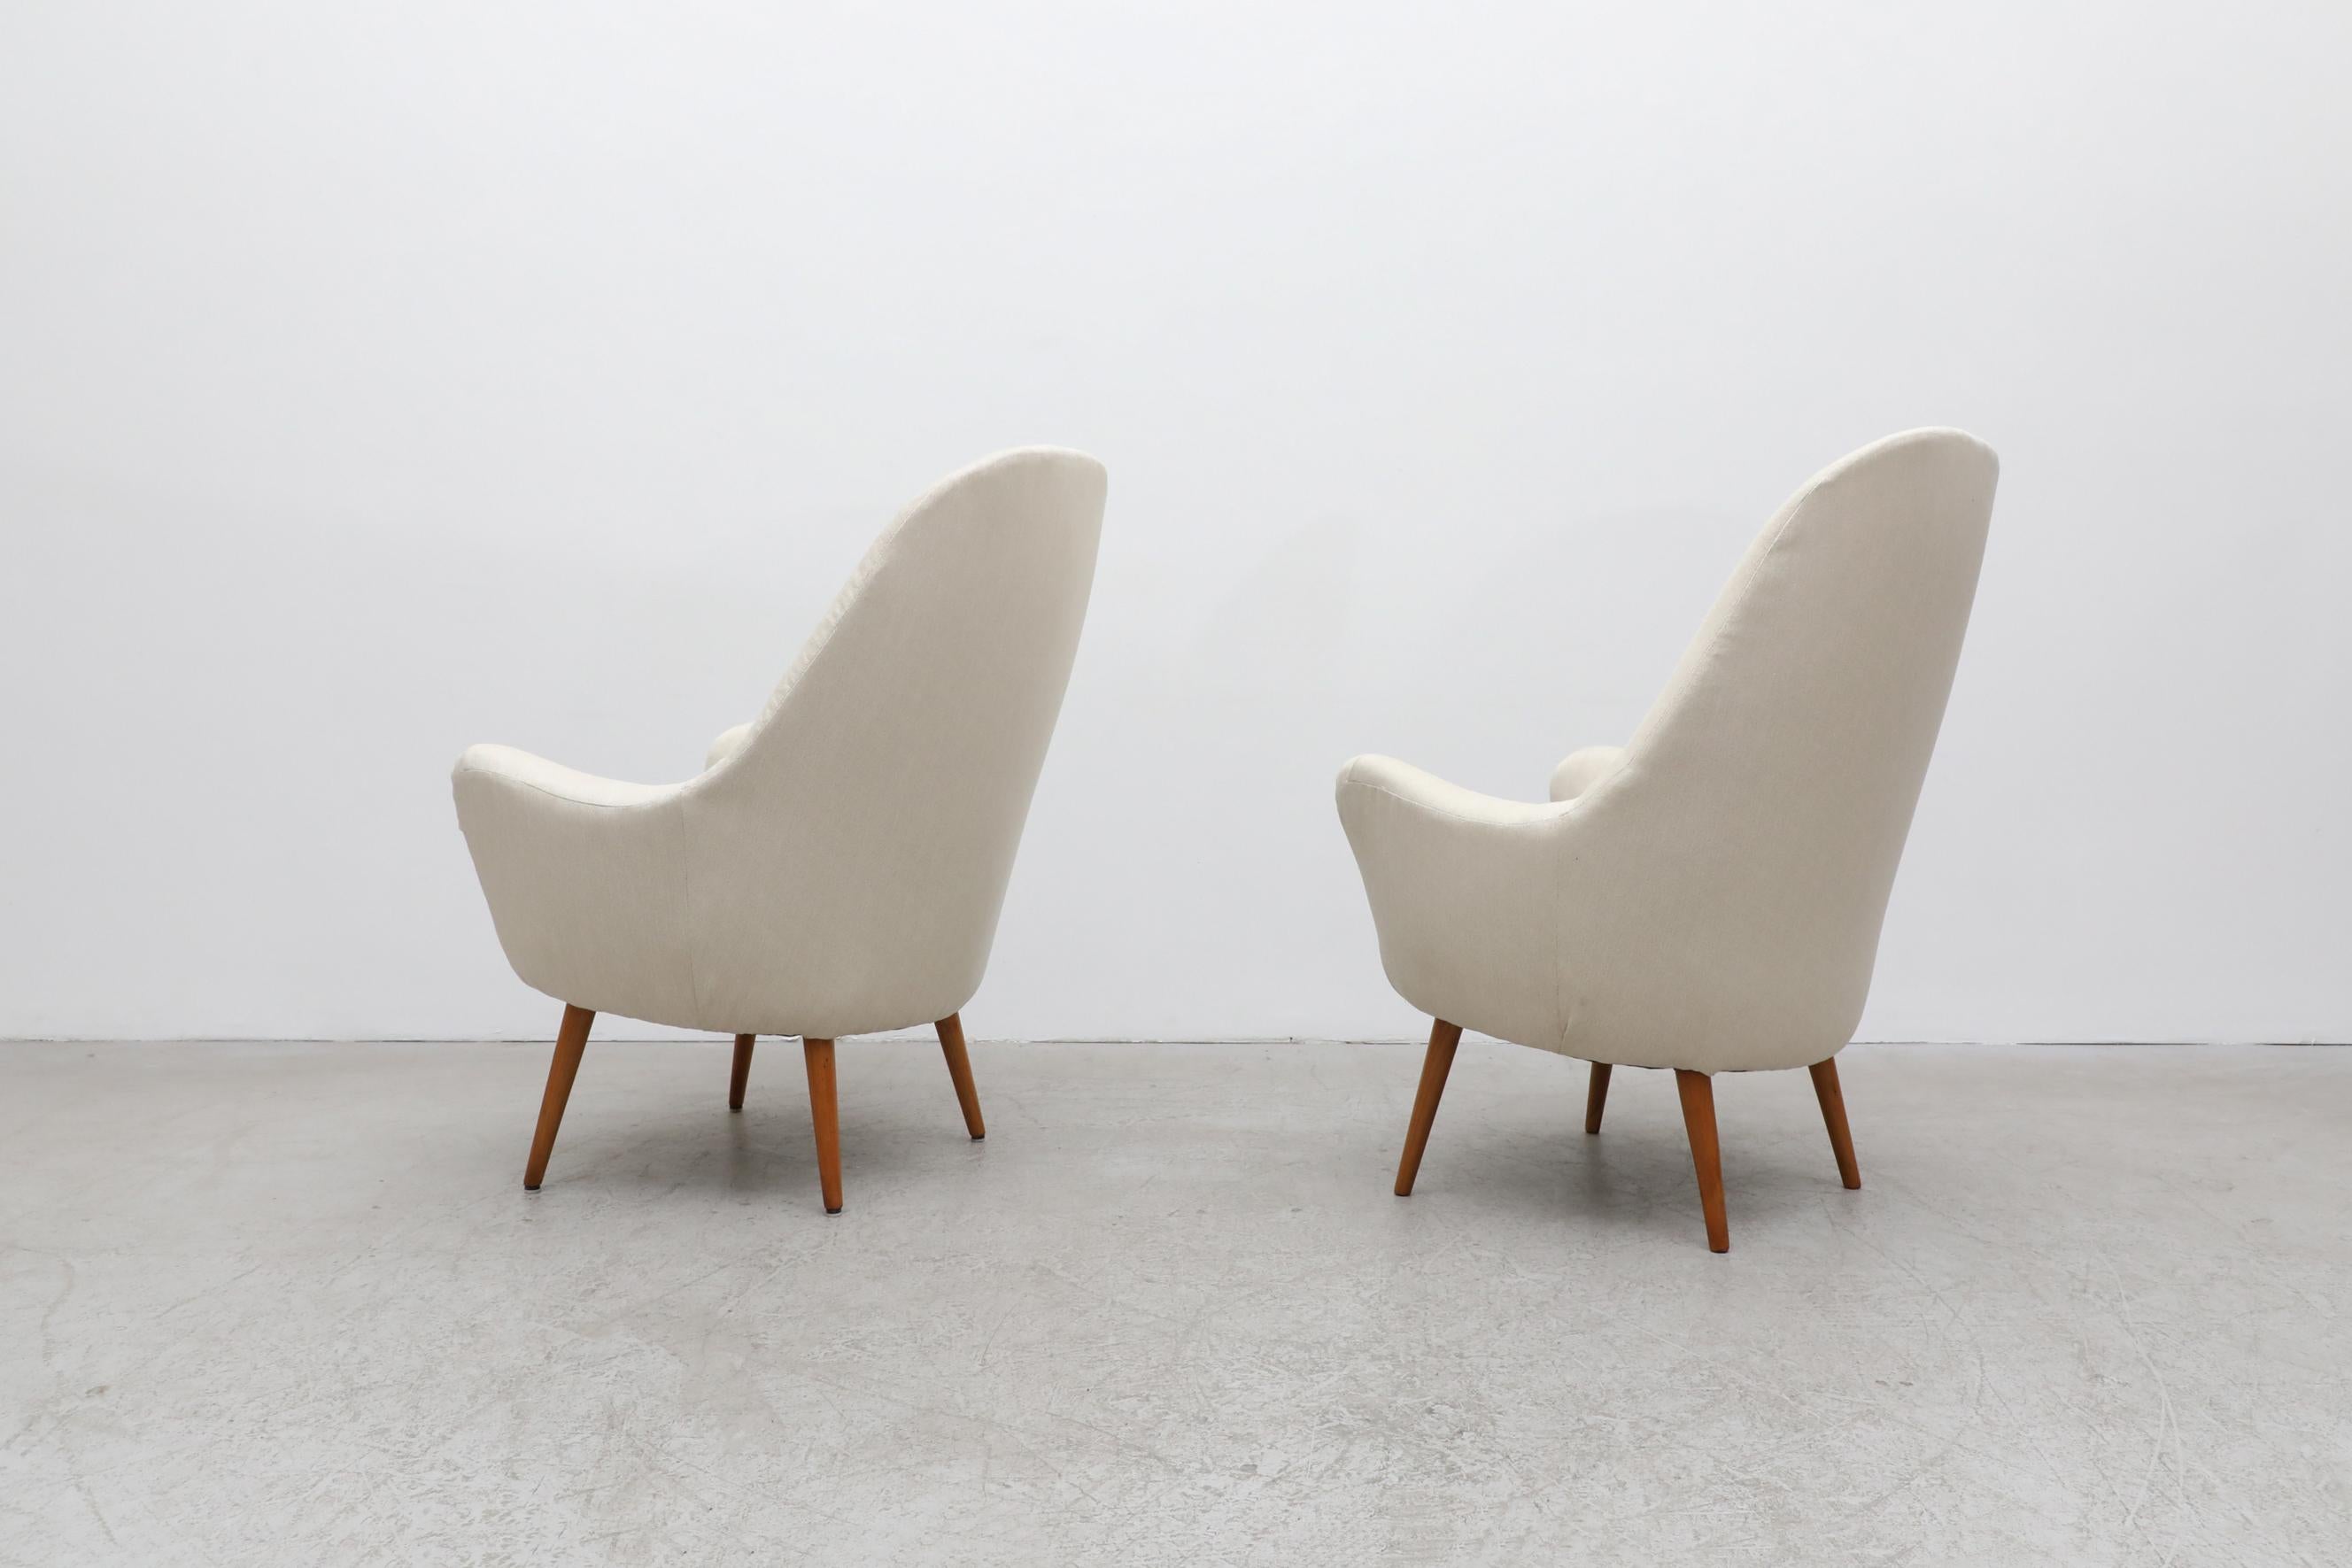 Upholstery Carl Malmsten 'Attr' White Upholstered Tall Swedish Lounge Chairs w/ Wood Legs For Sale